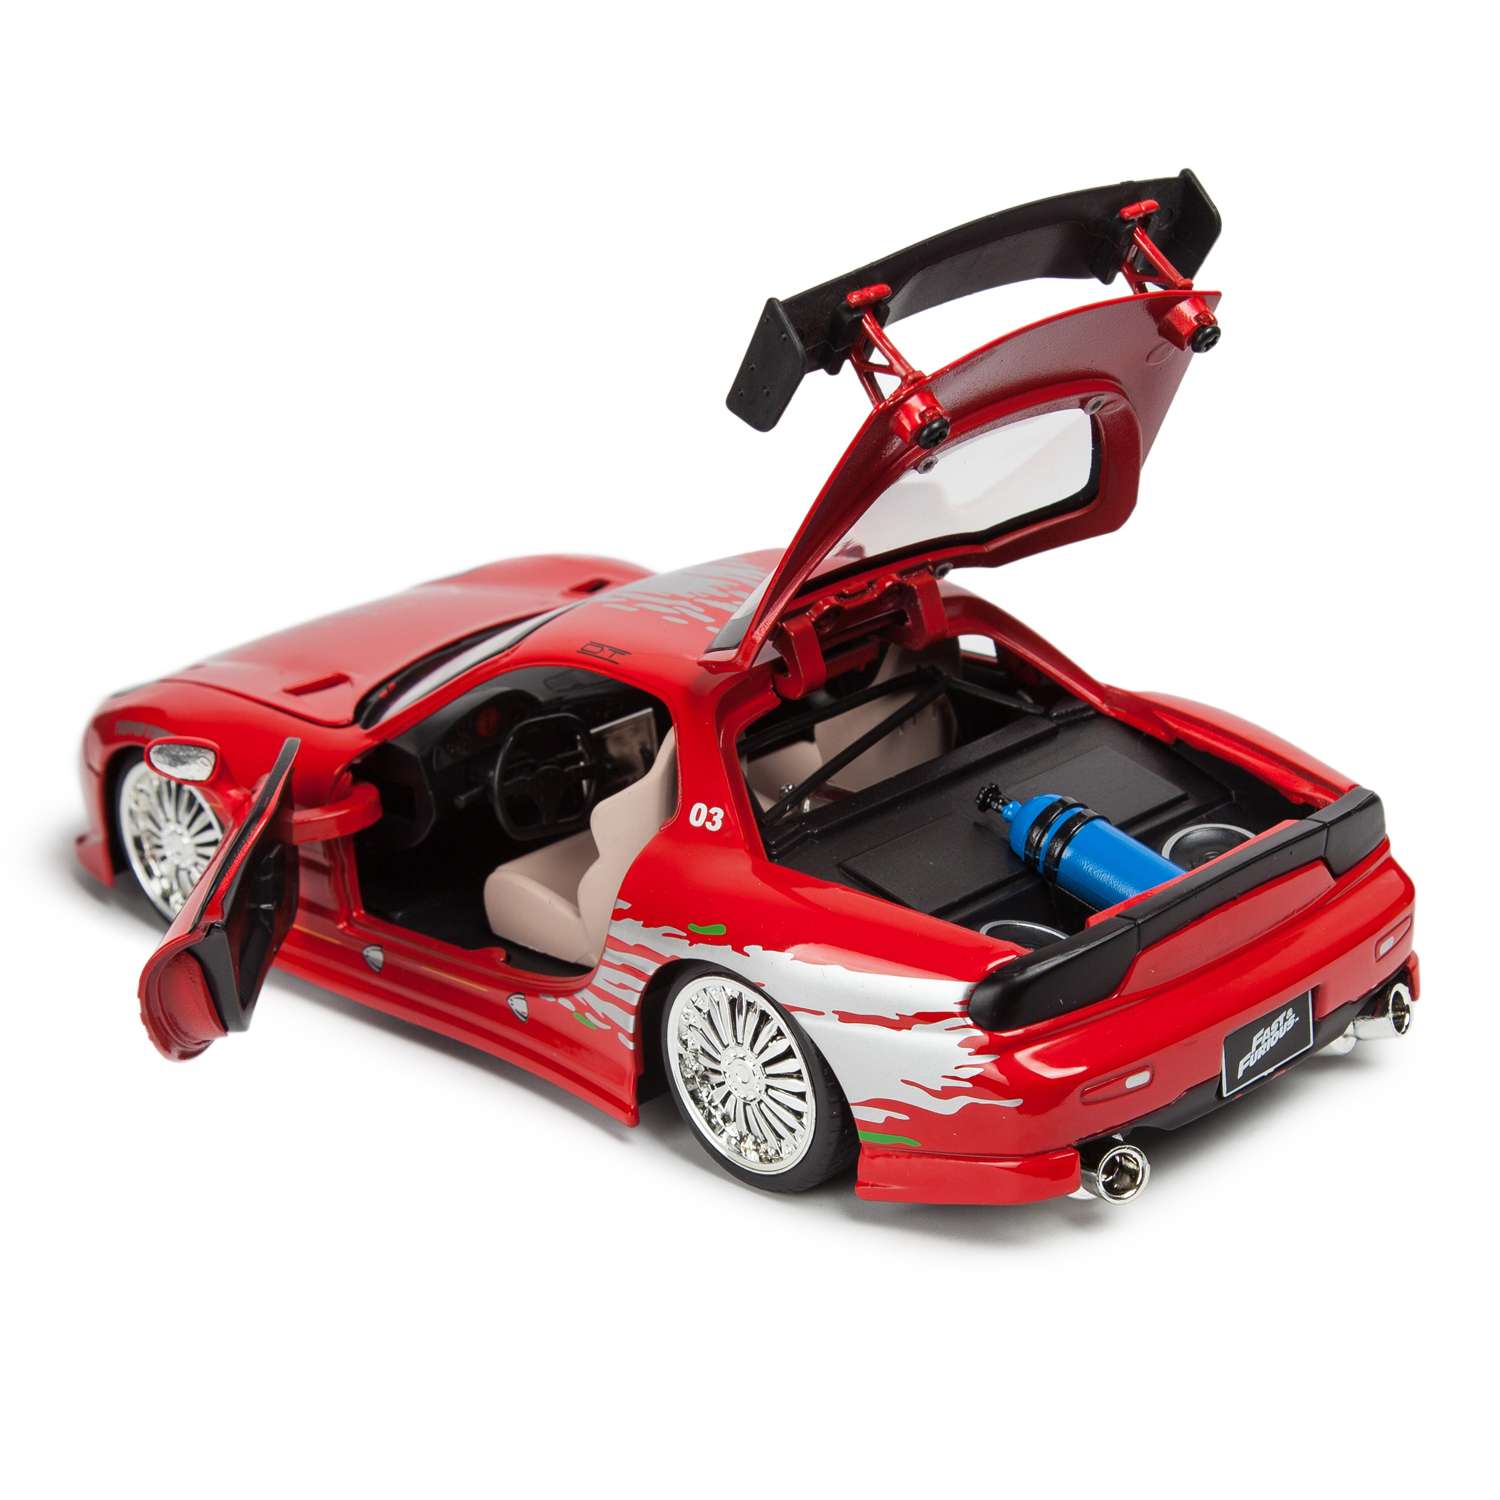 Машинка Fast and Furious Fast and Furious 1:24 1993 Mazda Rx-7 Fd3s-Wide Body Красная 98338 98338 - фото 4